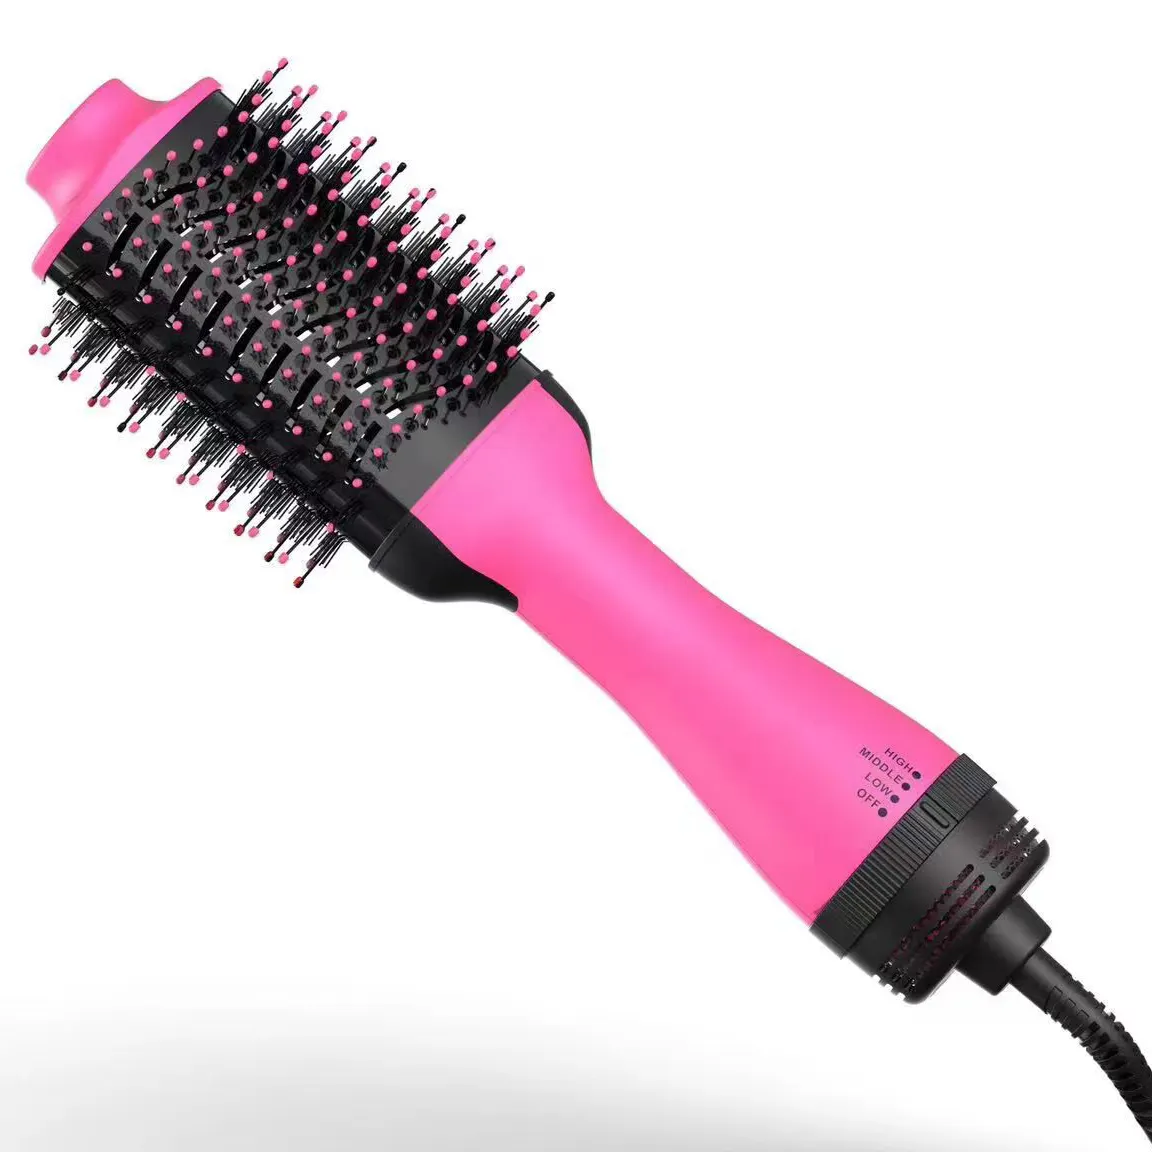 Factory price 3-in-1 Professional Round One step Electric Hair Rotating Portable Hot Heat Air Comb Blow salon Dryer Brush